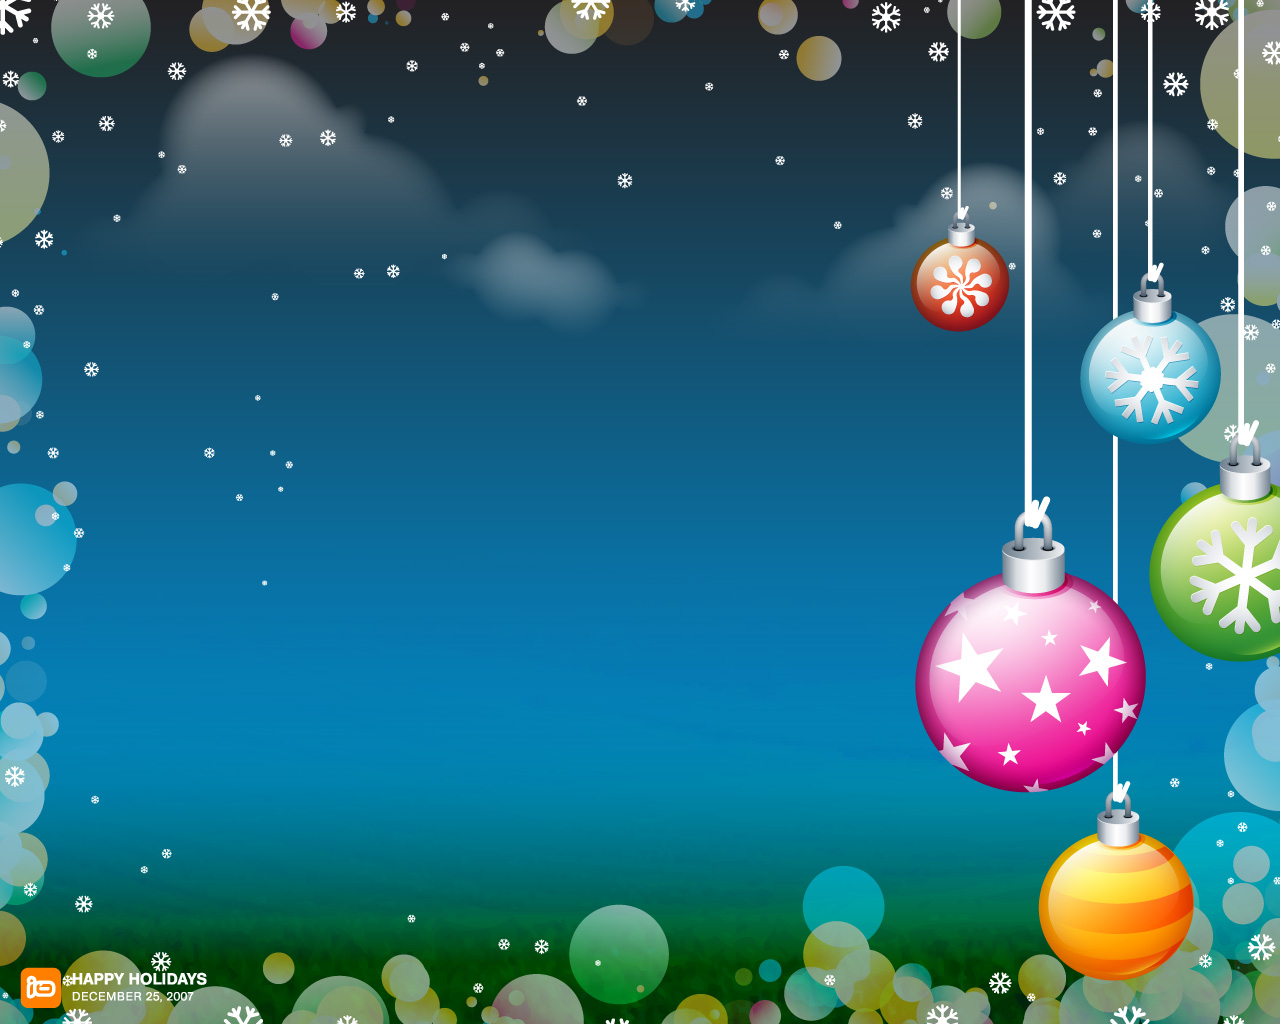 Free download Christmas Holiday Backgrounds Wallpapers Wallpapers